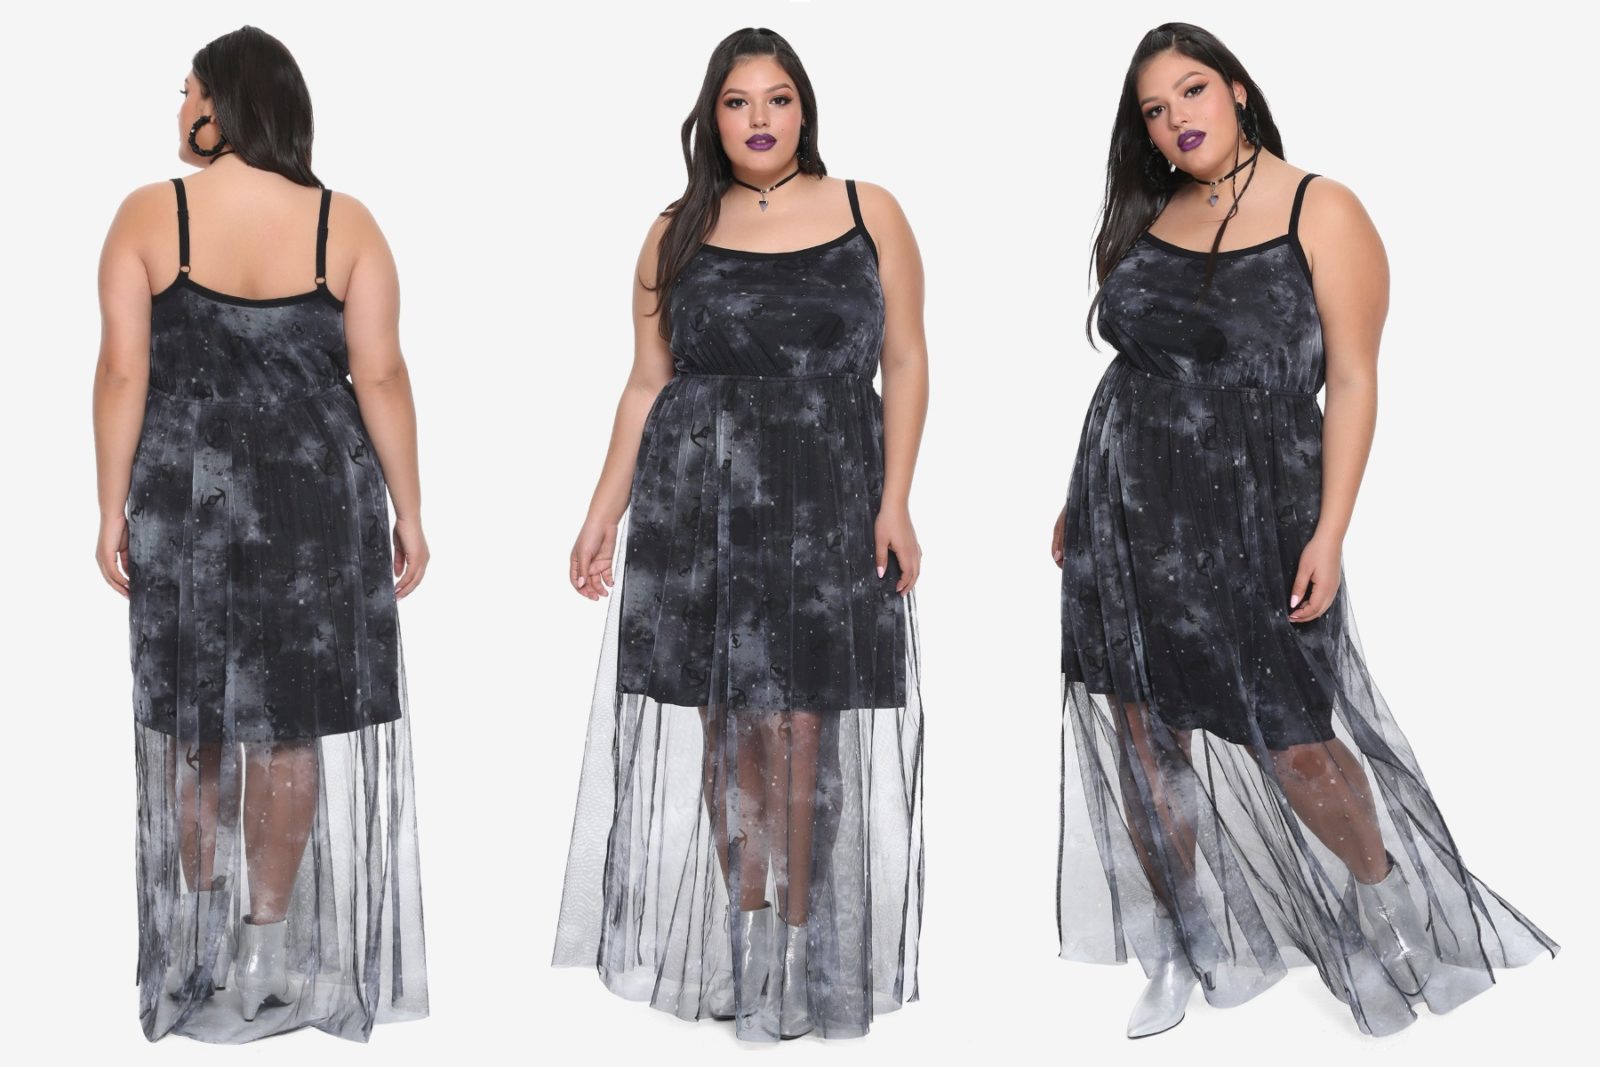 Plus Size Starfighter Maxi Dress at Hot Topic